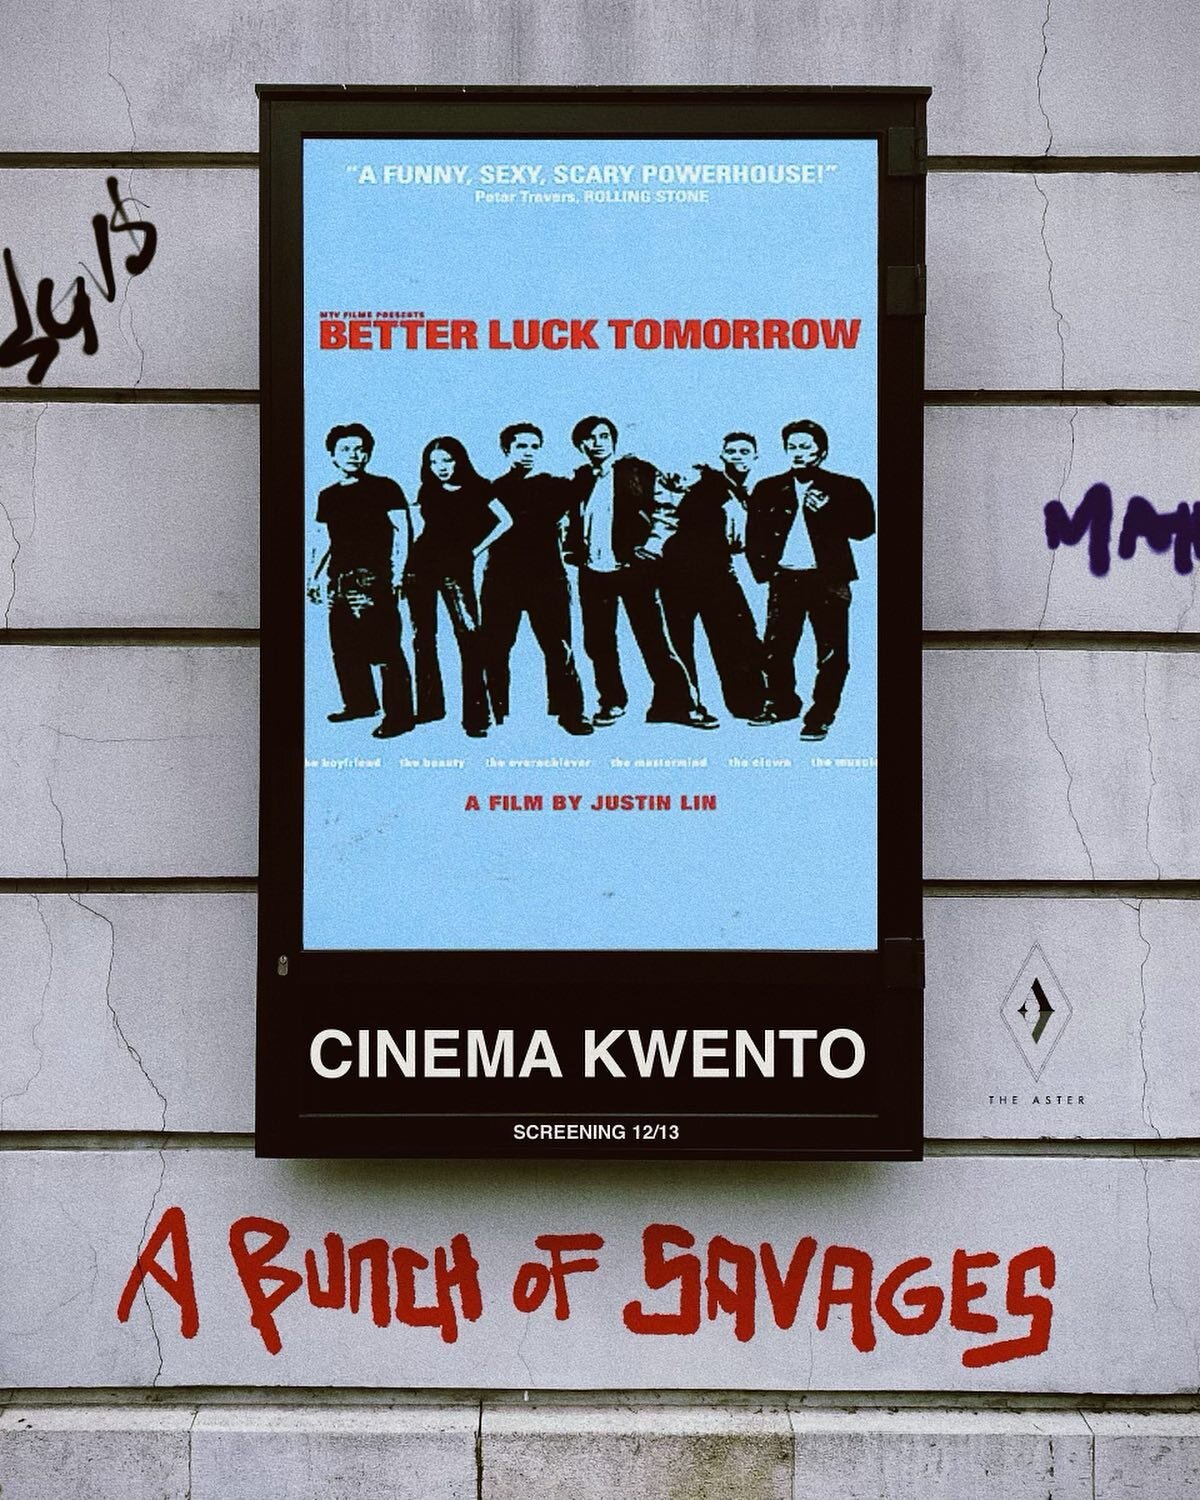 Come through to kick off Cinema Kwento 💥

In partnership with @theasterlosangeles, our new quarterly screening series, Cinema Kwento, is a celebration of impactful, subversive films &ndash; both a mix of older classics and newer joints &ndash; from 